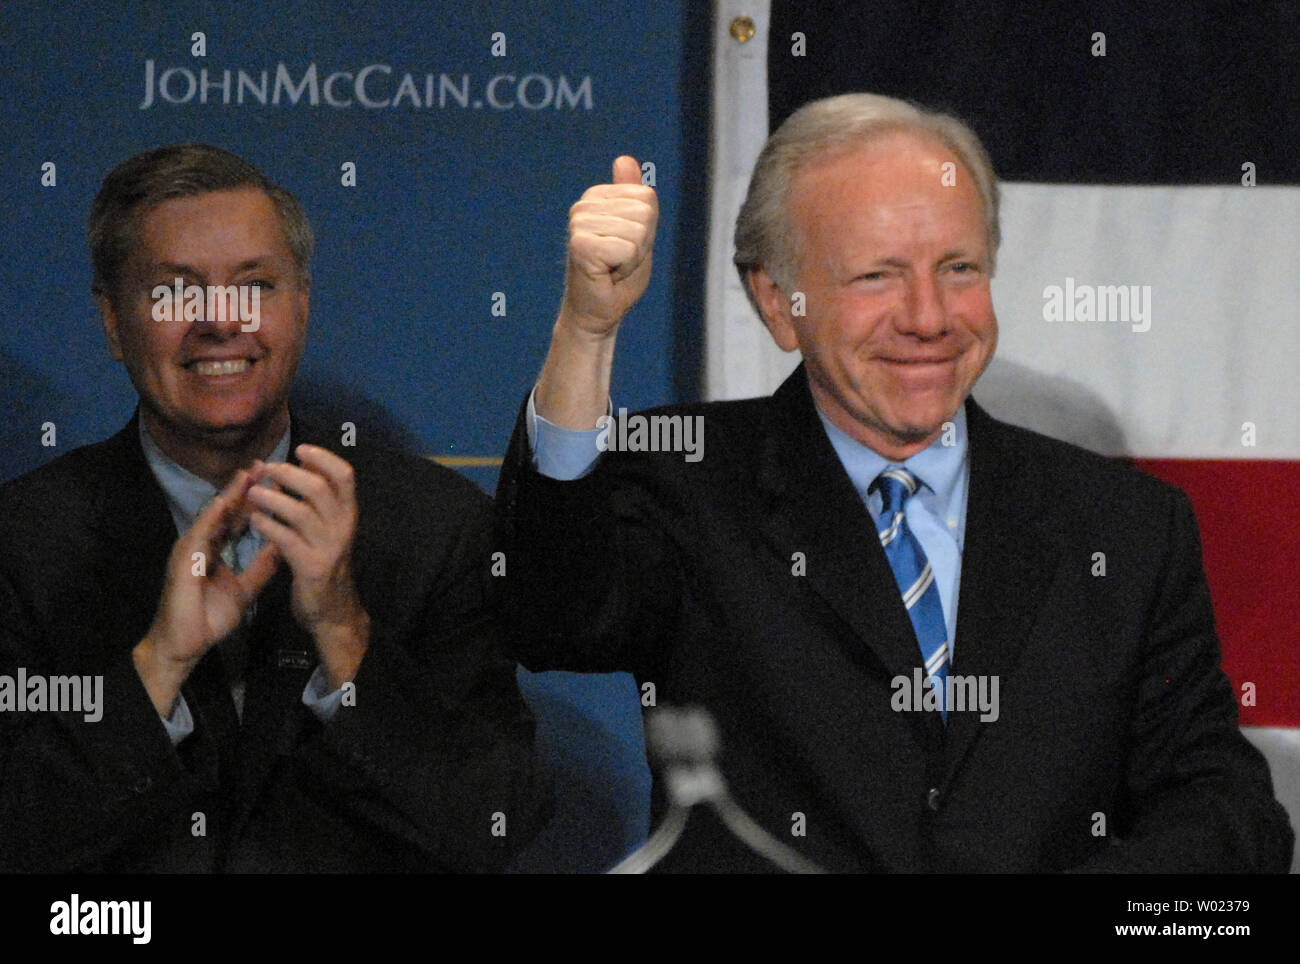 Sen. Joe Lieberman (I-CT) (R) and Sen. Lindsey Graham (R-SC) attend a rally for Sen. John McCain (R-AZ) on Super Tuesday at the Arizona Biltmore Resort in Phoenix, Arizona on February 5, 2008. McCain is the projected leader in the race for the GOP nomination as 24 U.S. states vote in the primary election. (UPI Photo/Alexis C. Glenn) Stock Photo